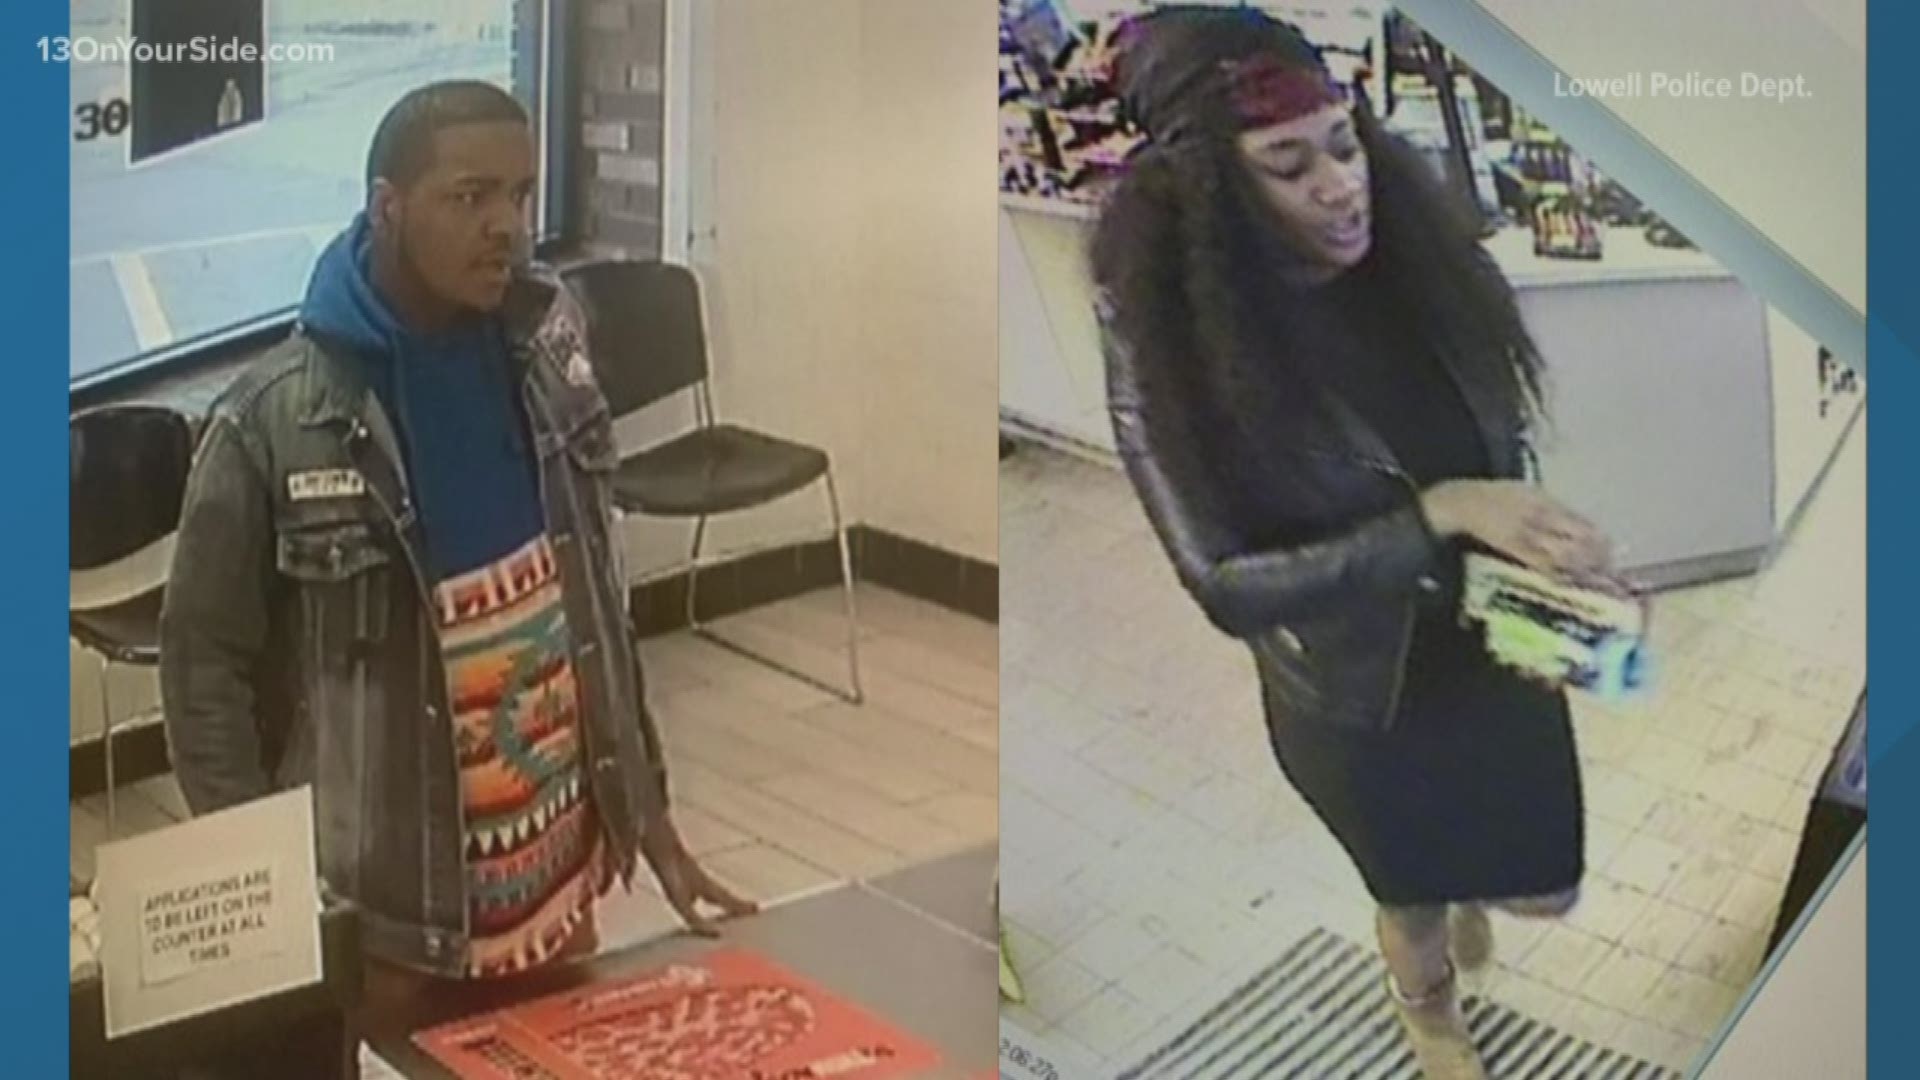 Police say the man and woman have passed 6 fake $100 bills in Lowell is the last couple days.